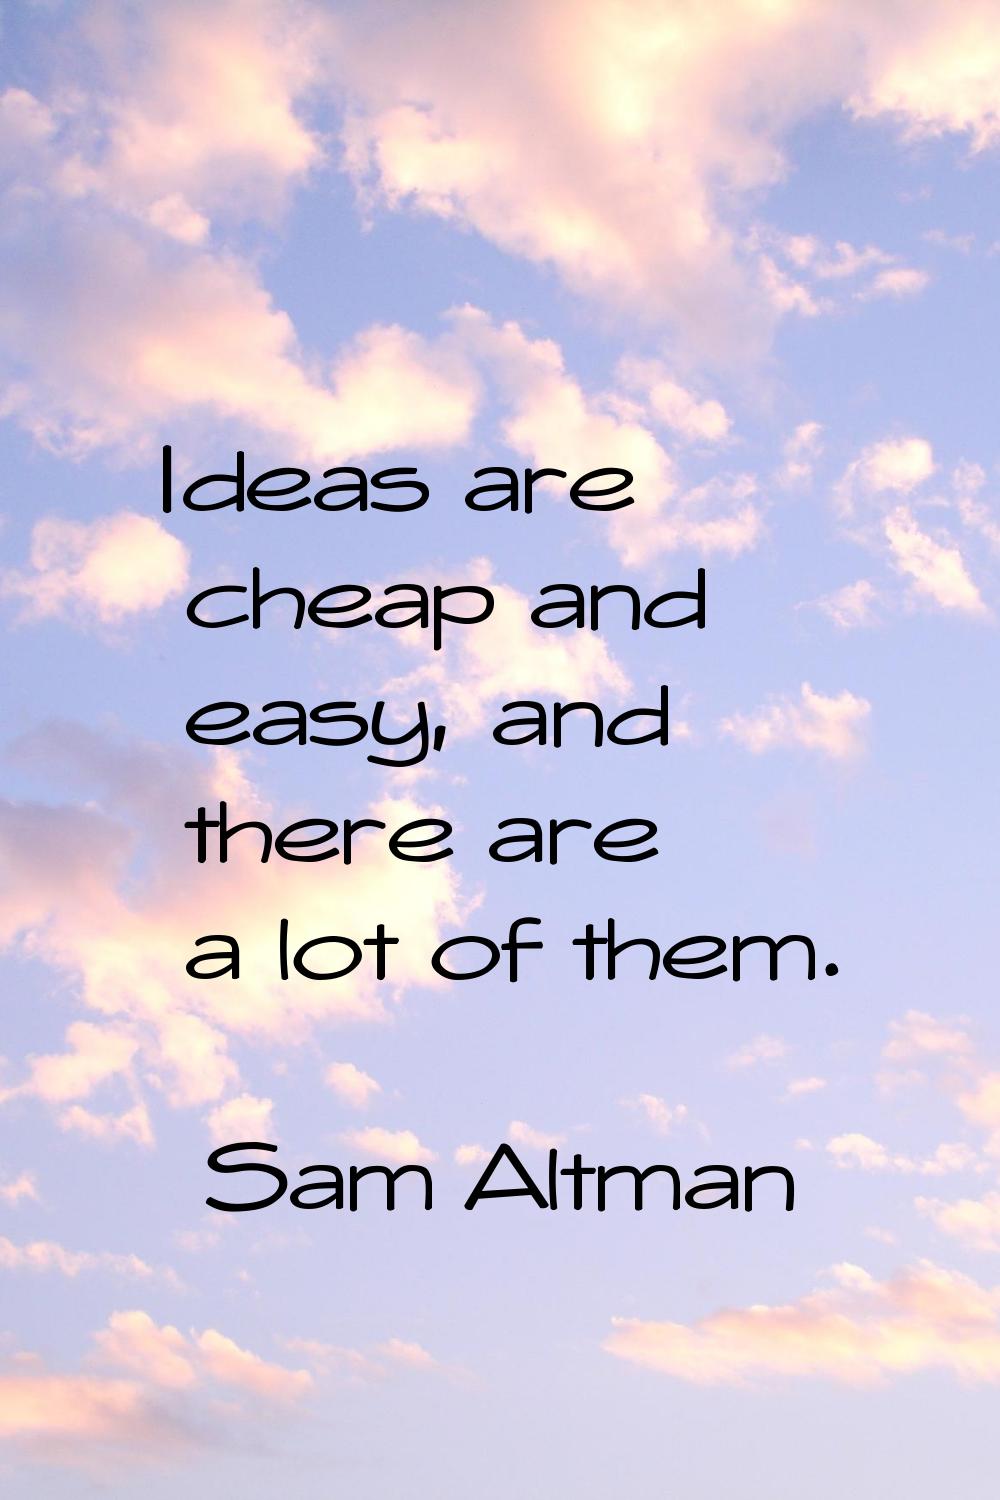 Ideas are cheap and easy, and there are a lot of them.